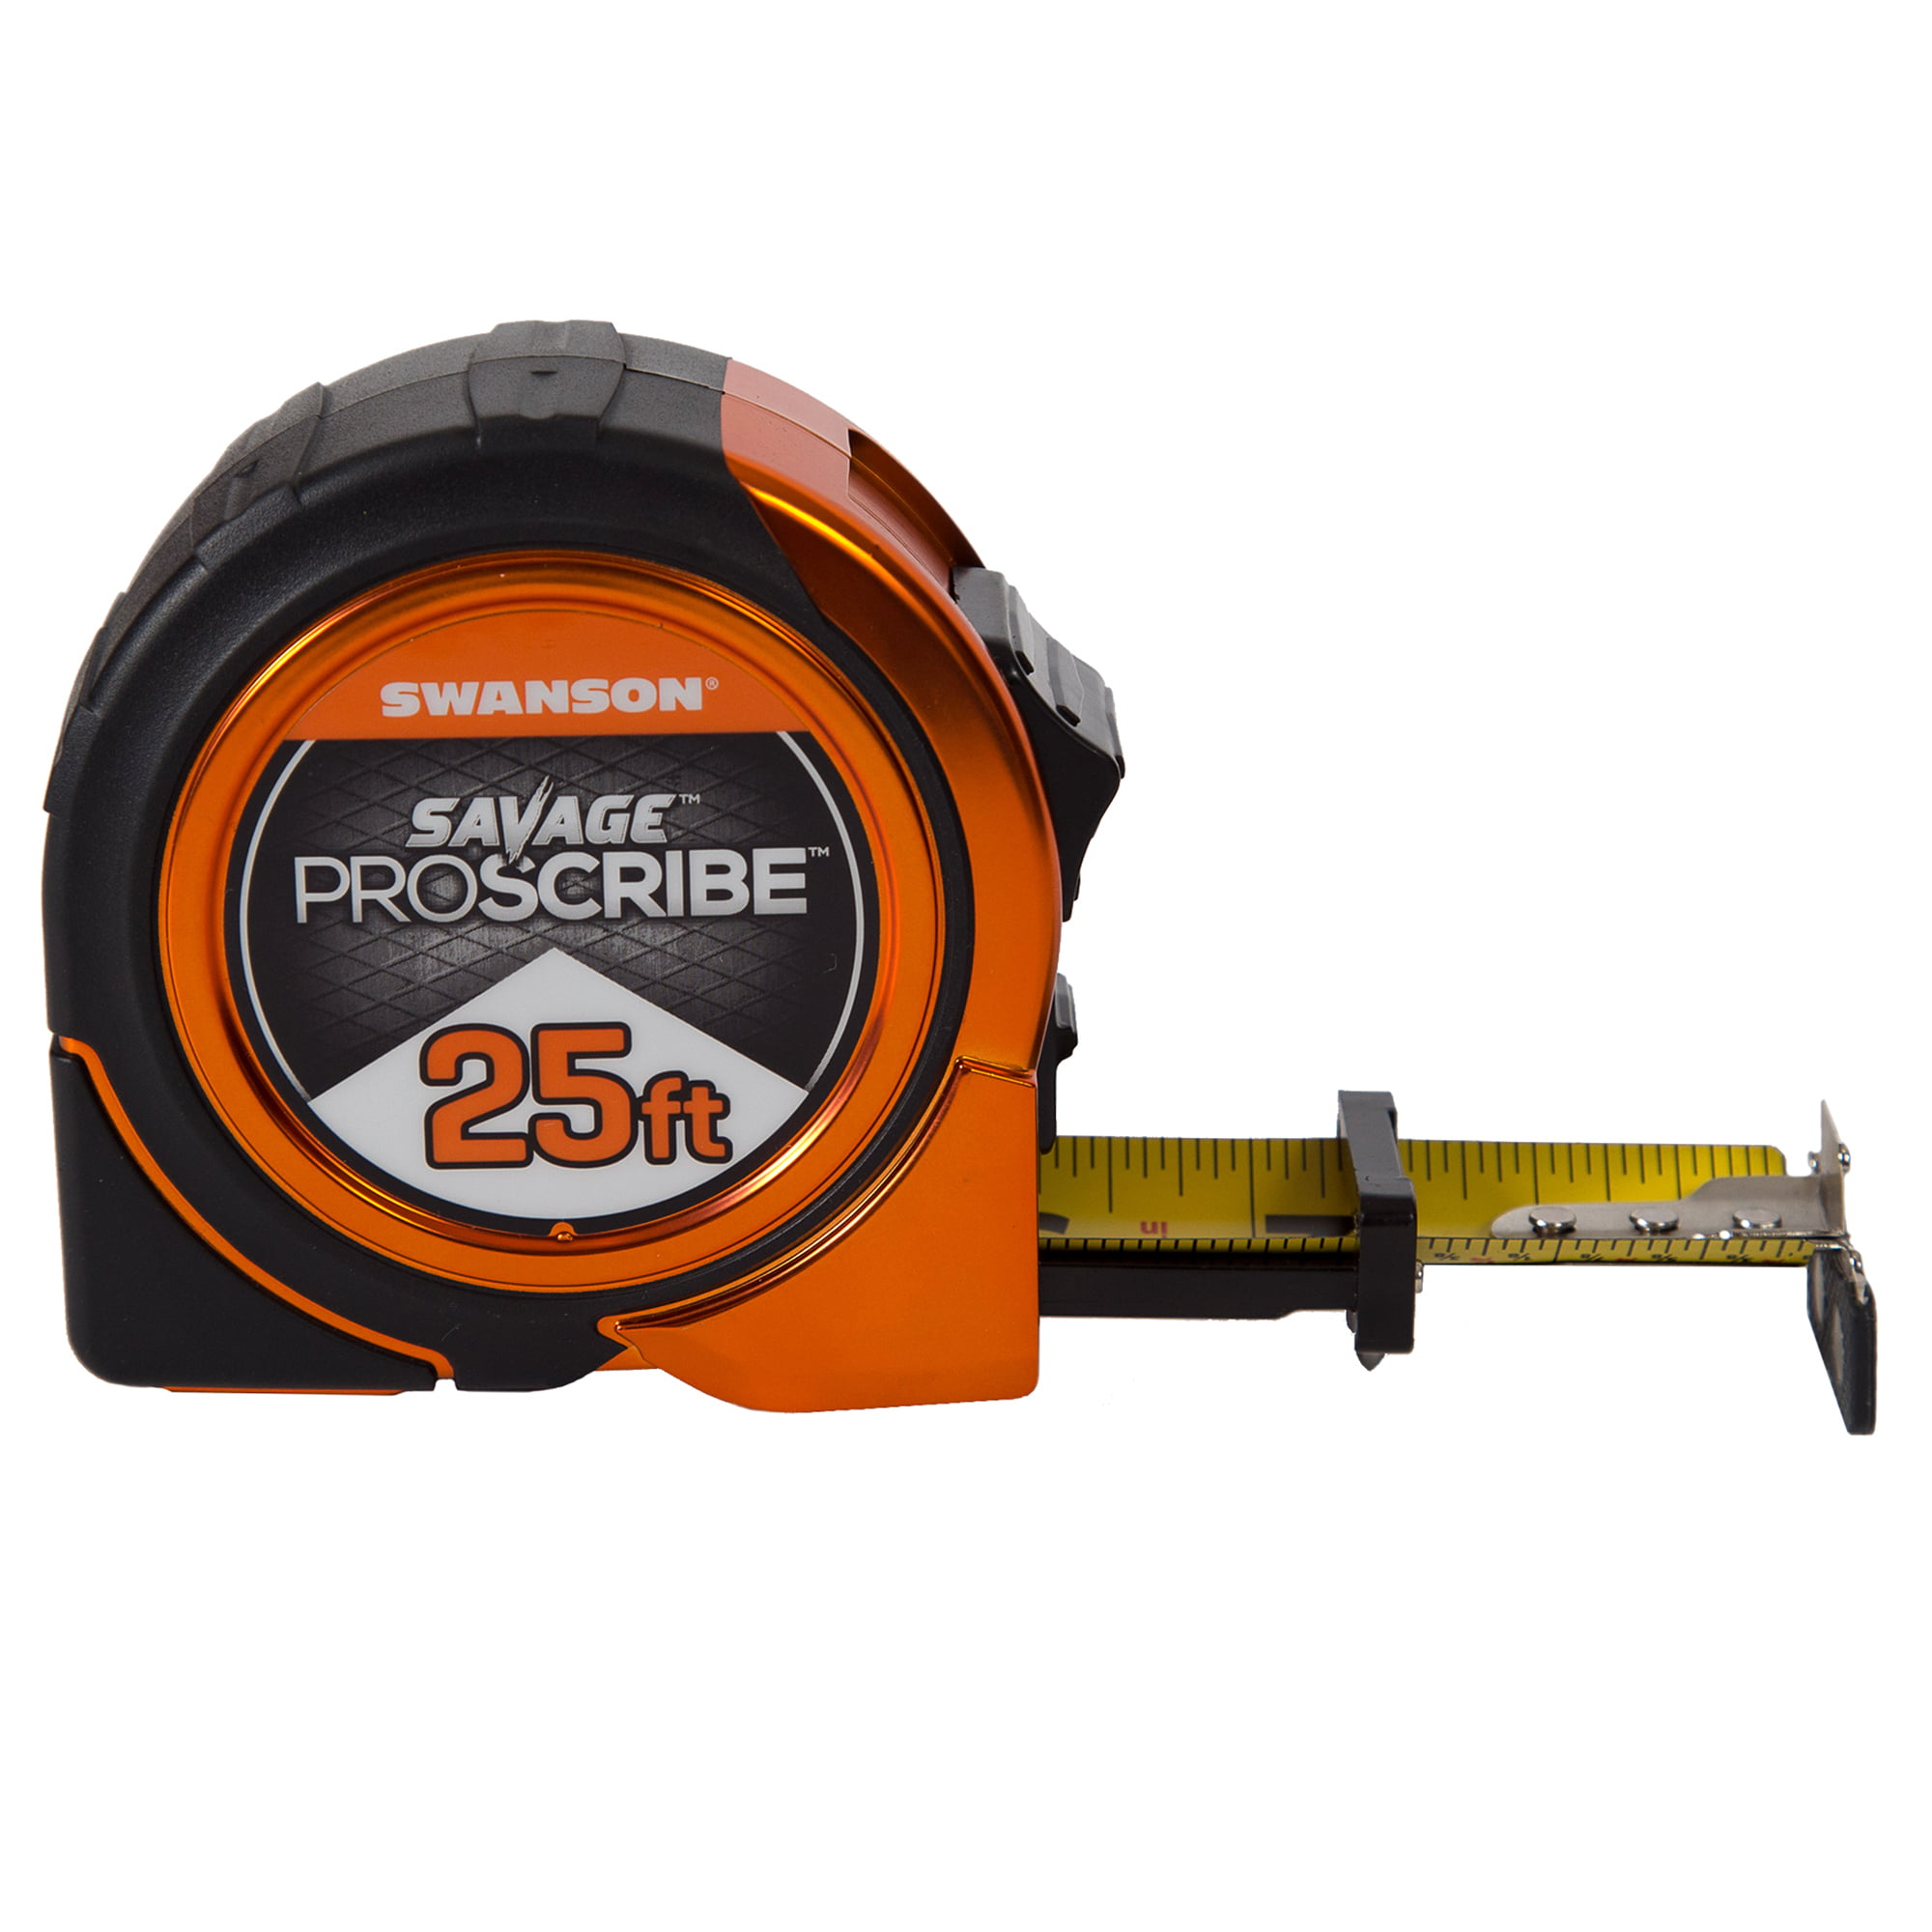 How to Read a Tape Measure - Tips and Photos - Pro Tool Reviews